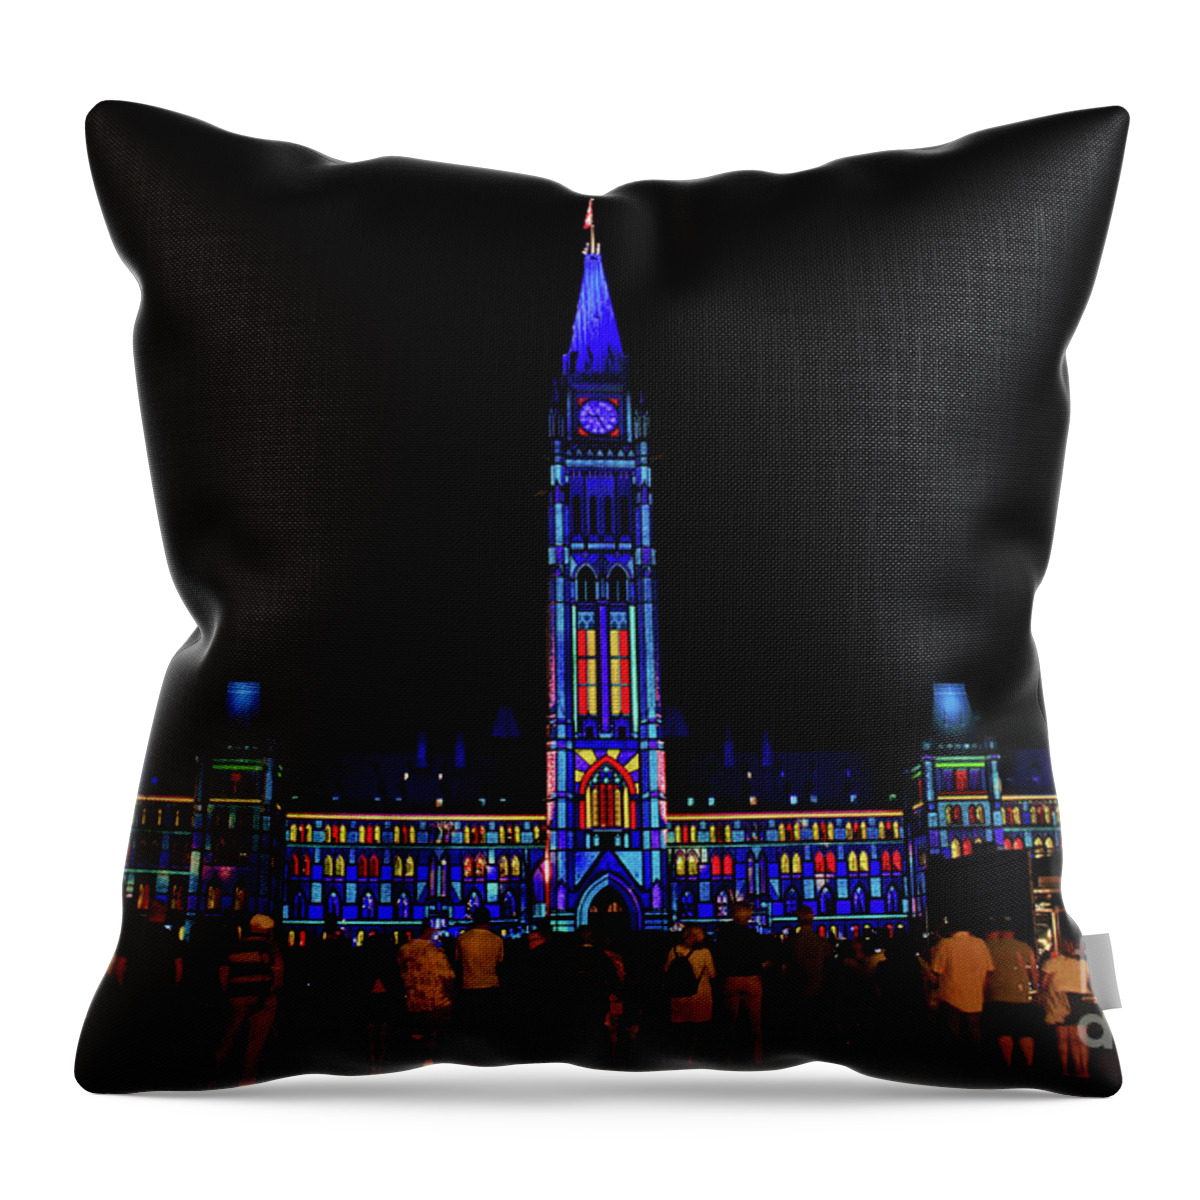 Ottawa Throw Pillow featuring the photograph Canadian Parliament Light Show by Charline Xia